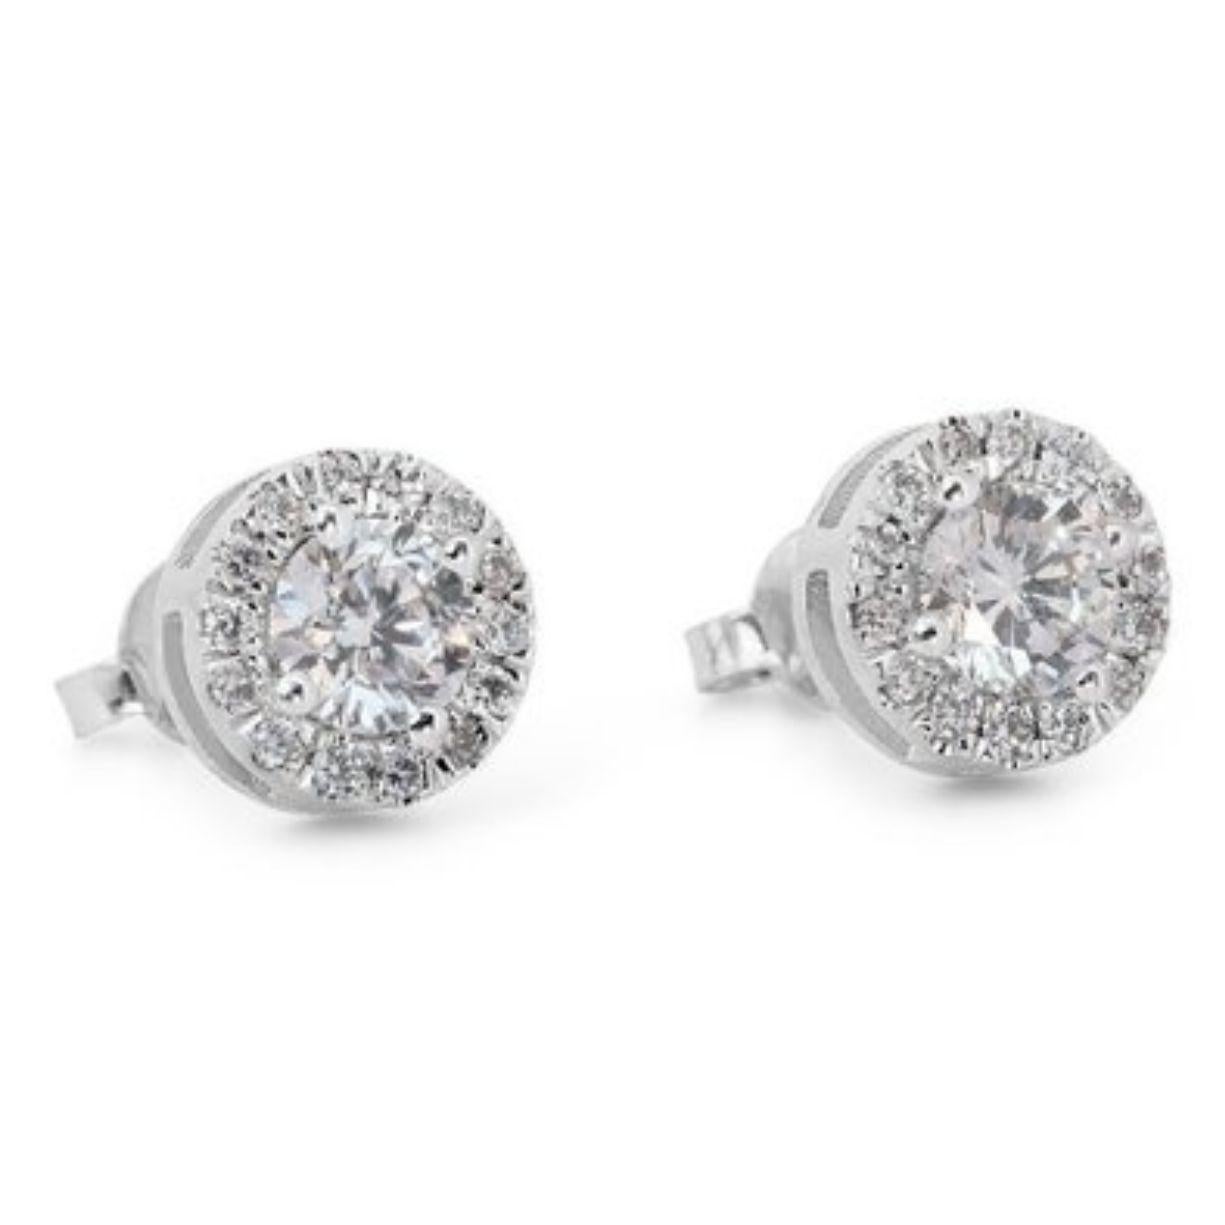 Embrace radiance with these breathtaking 1.14 carat halo diamond earrings, meticulously crafted in gleaming 18K white gold. Each earring features a mesmerizing D color (highest color grade!) Round Brilliant center diamond boasting near-flawless VVS1